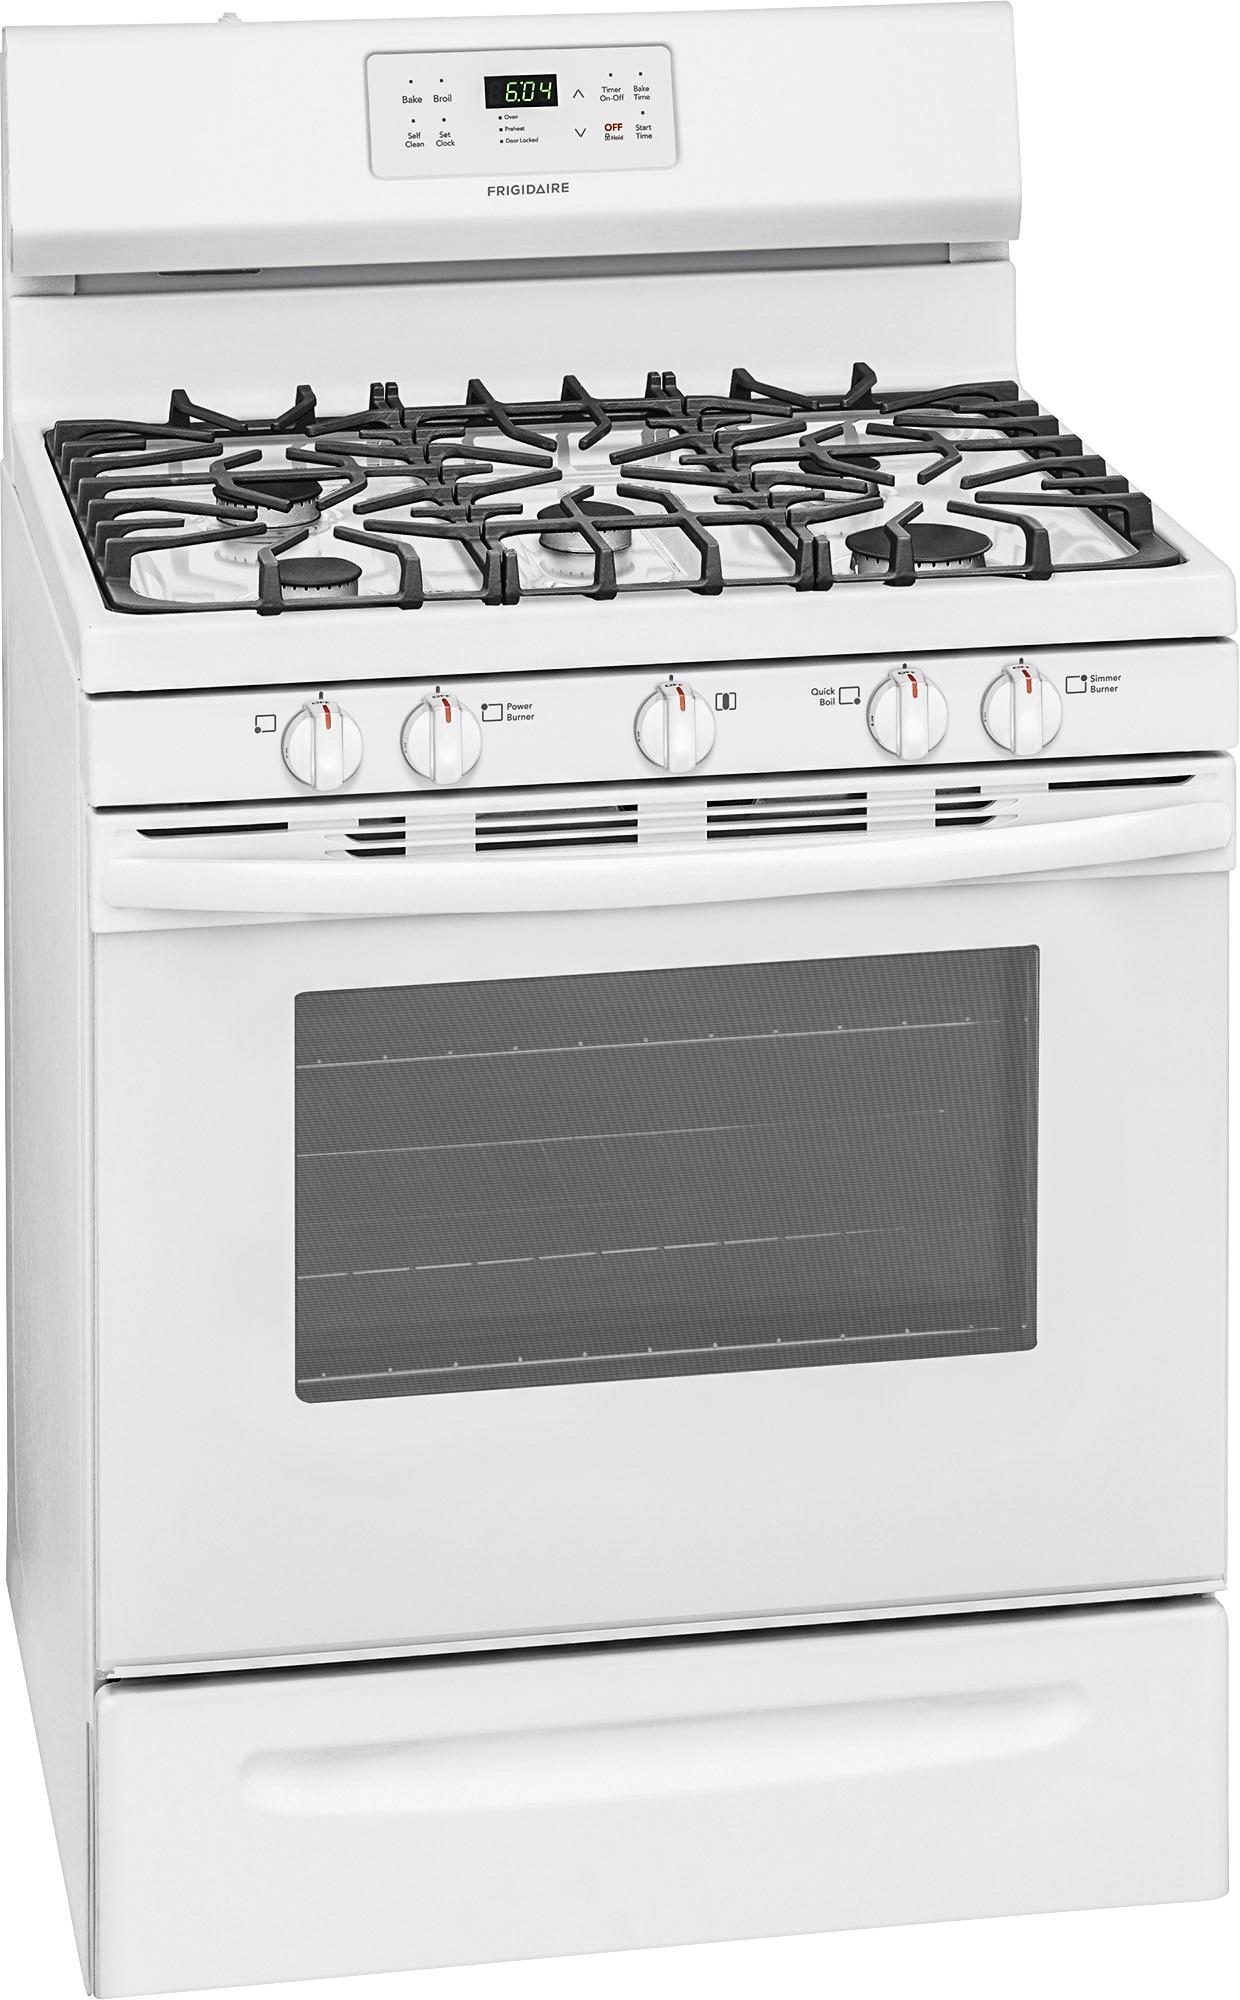 Angle View: Viking - Professional 5 Series 30.7" LP Gas Cooktop - Stainless steel